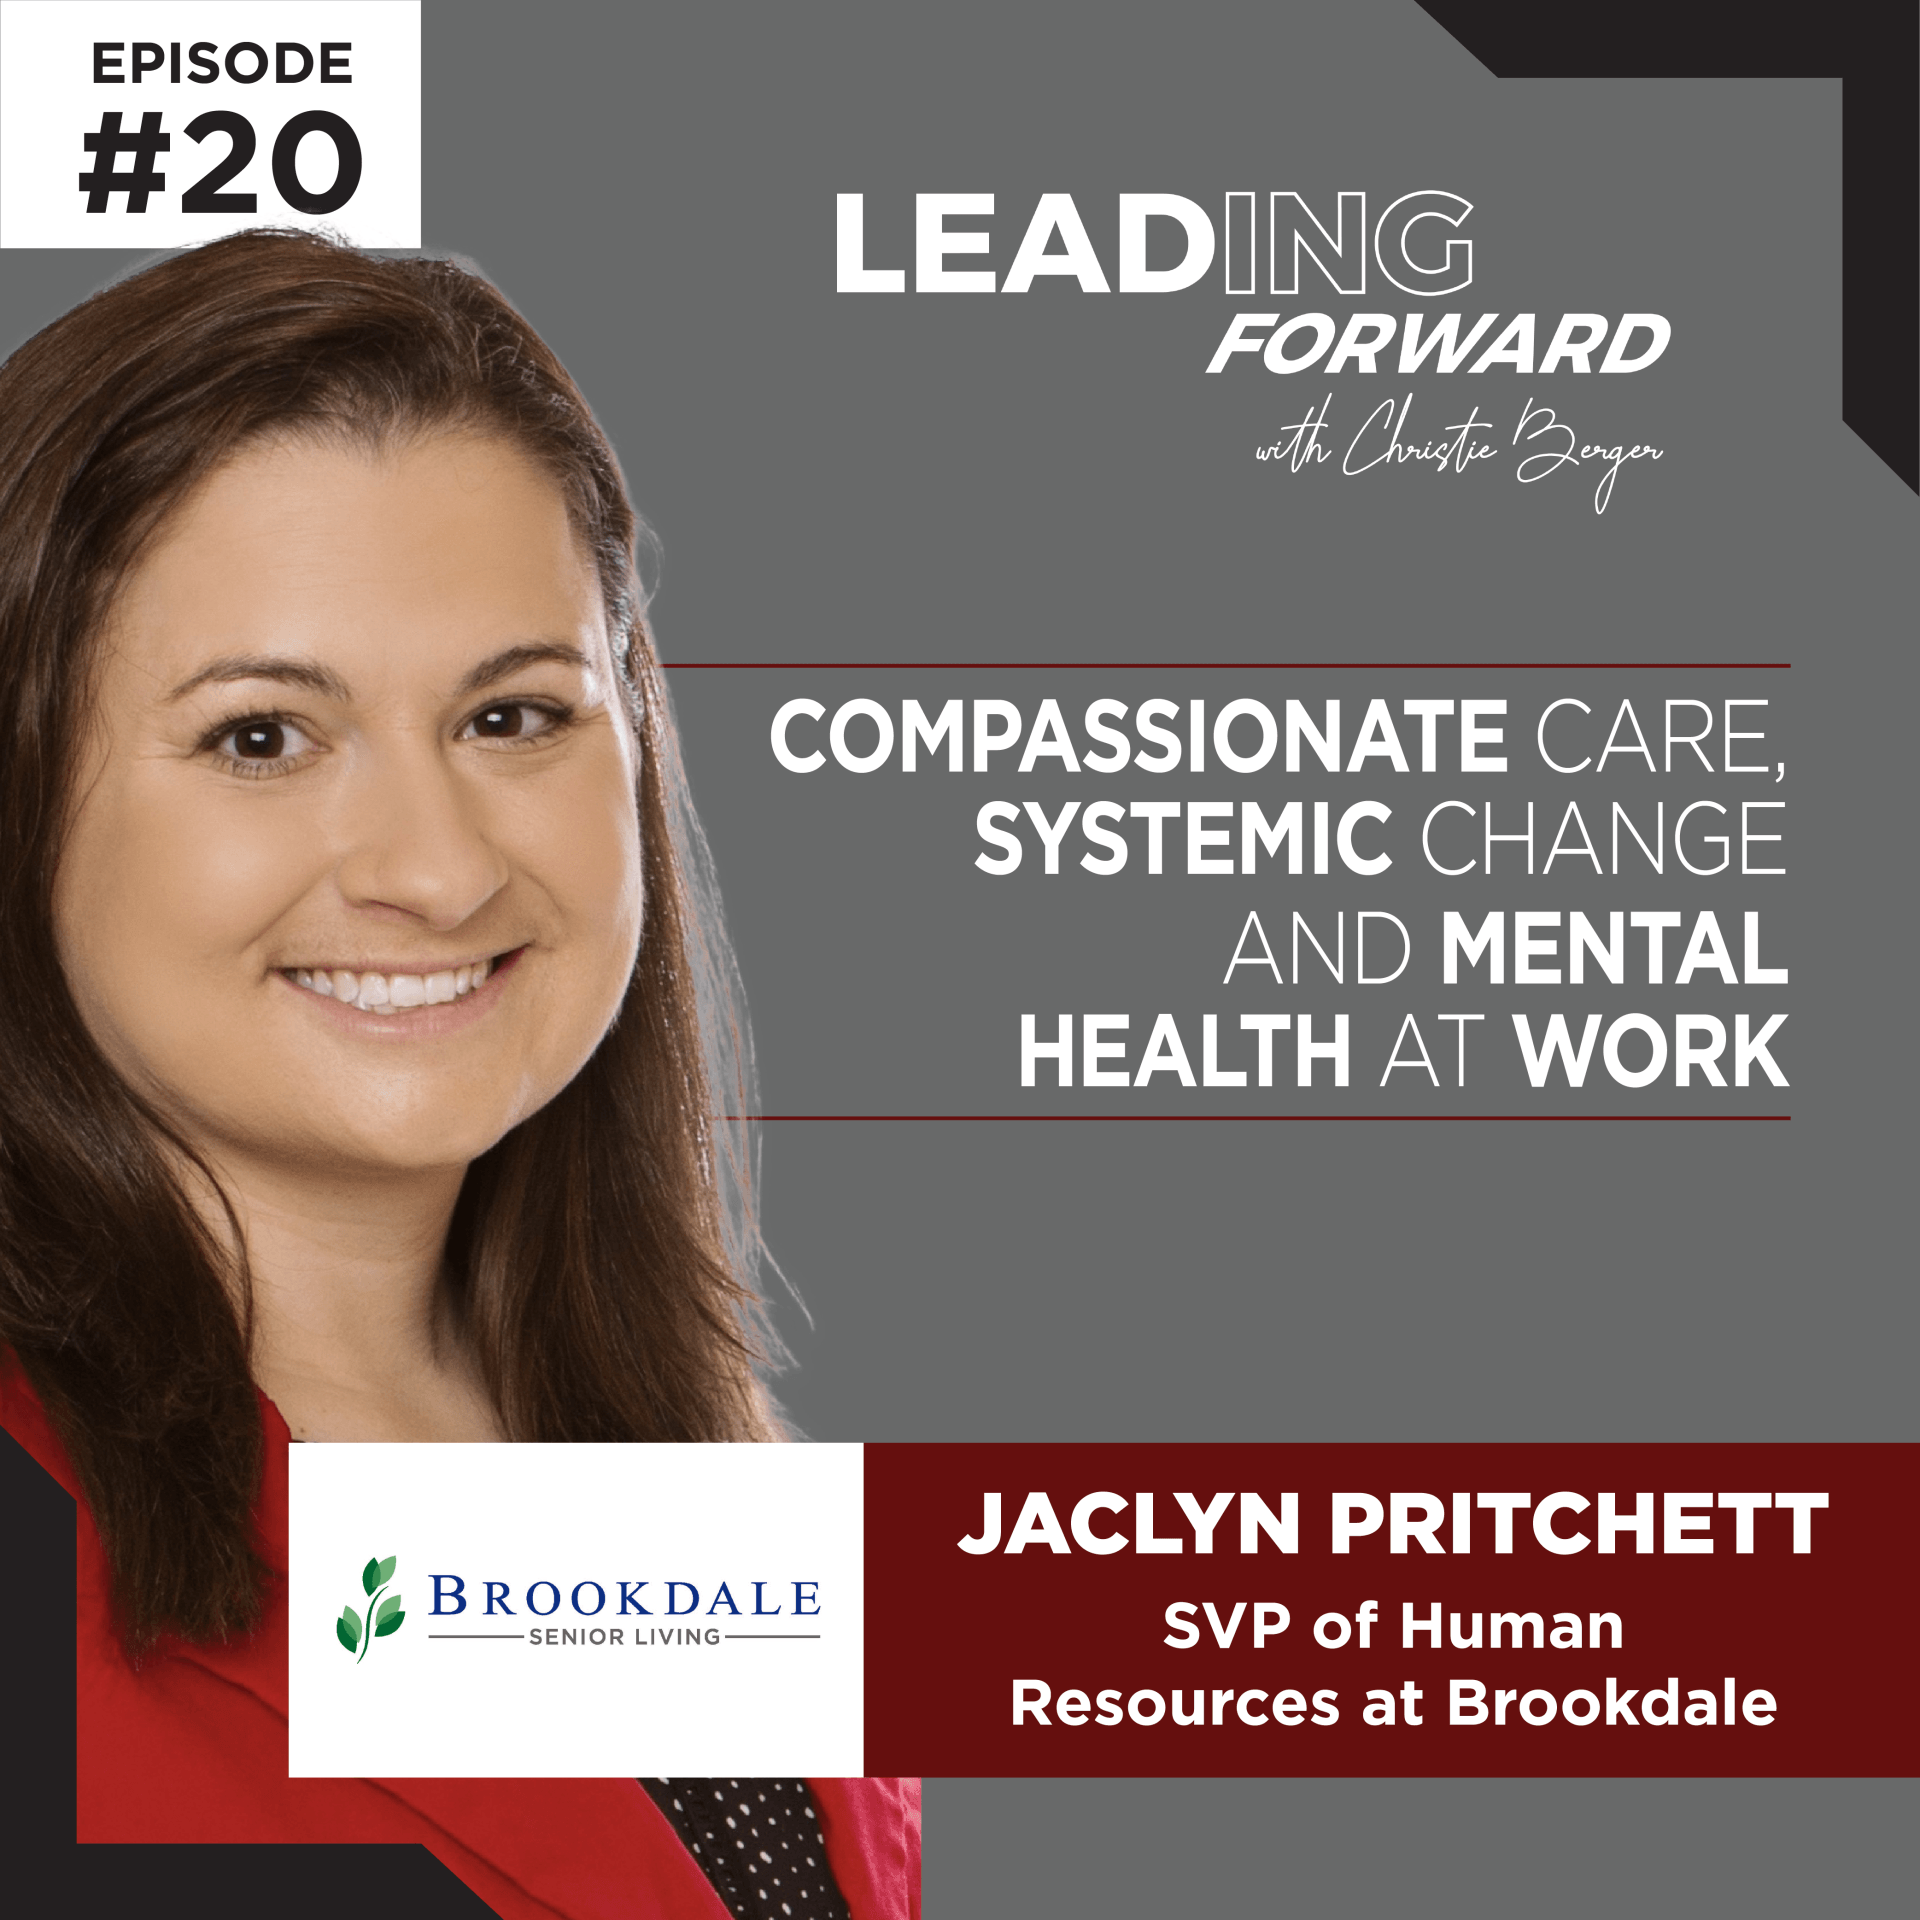 Jaclyn Pritchett from Brookdale discusses compassionate care and mental health on Leading Forward.